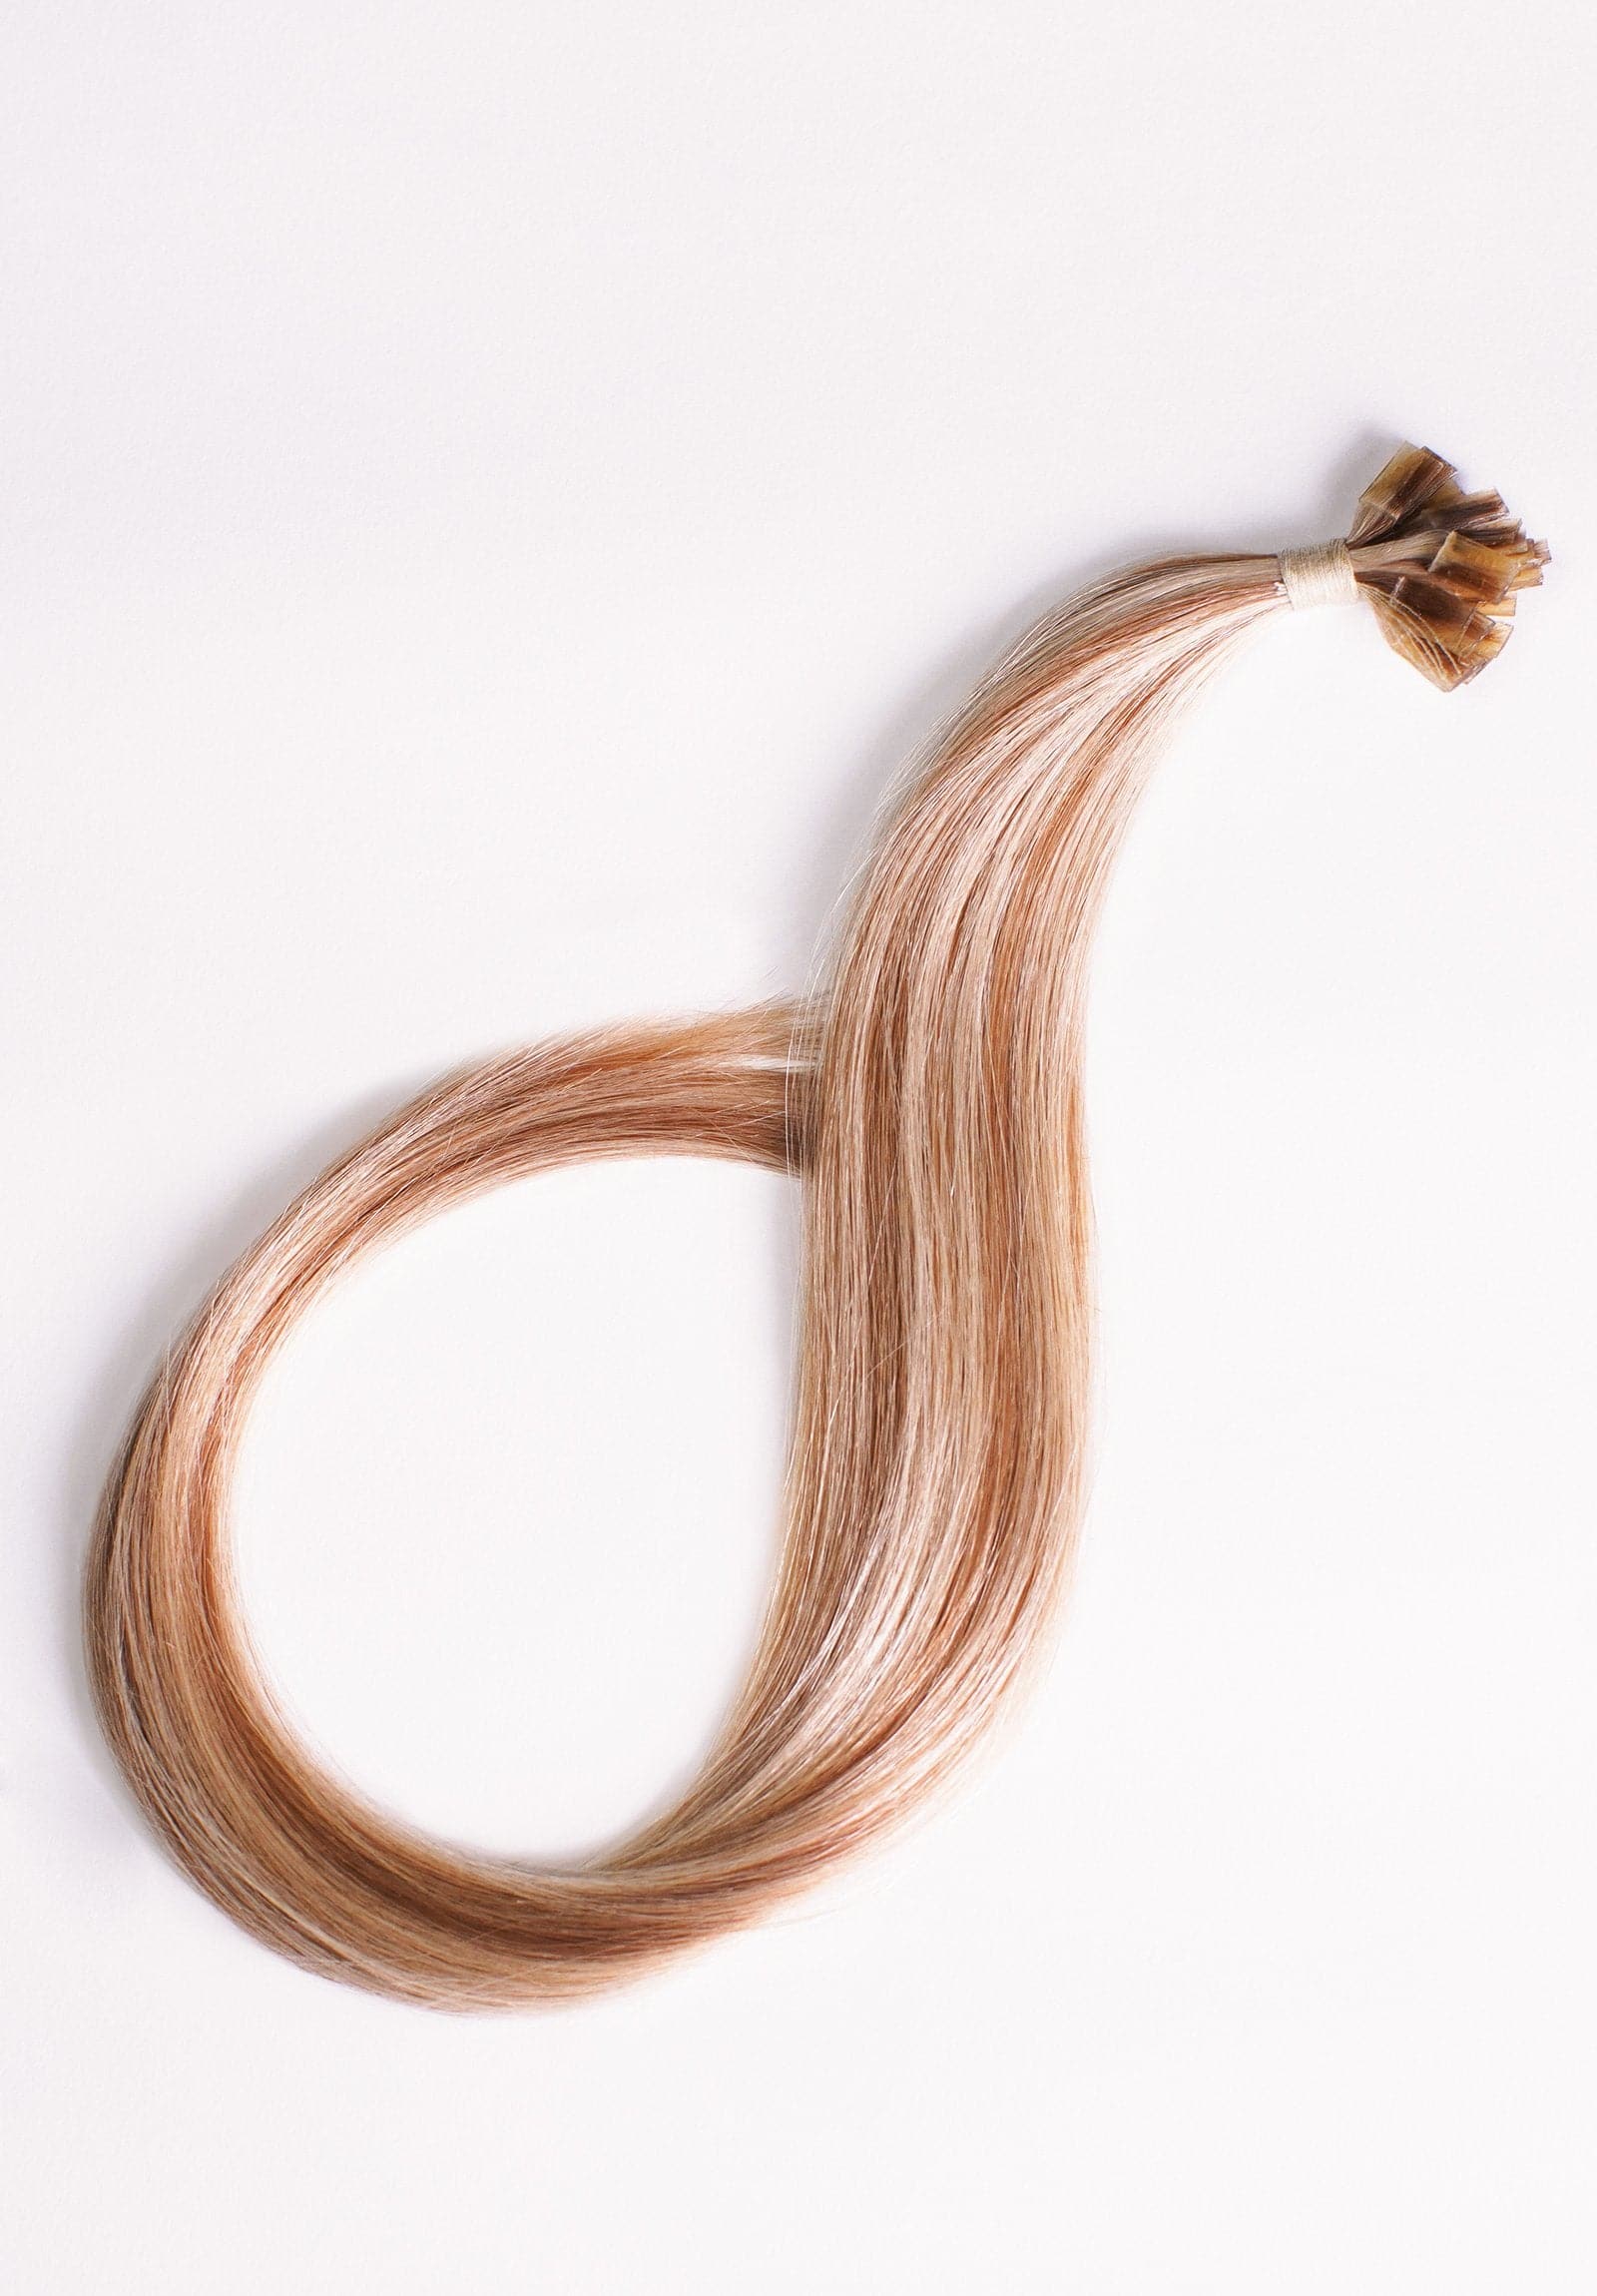 16" Kera-Link Straight #27/613 (Light Blond with Strawberry) - Donna Bella Hair